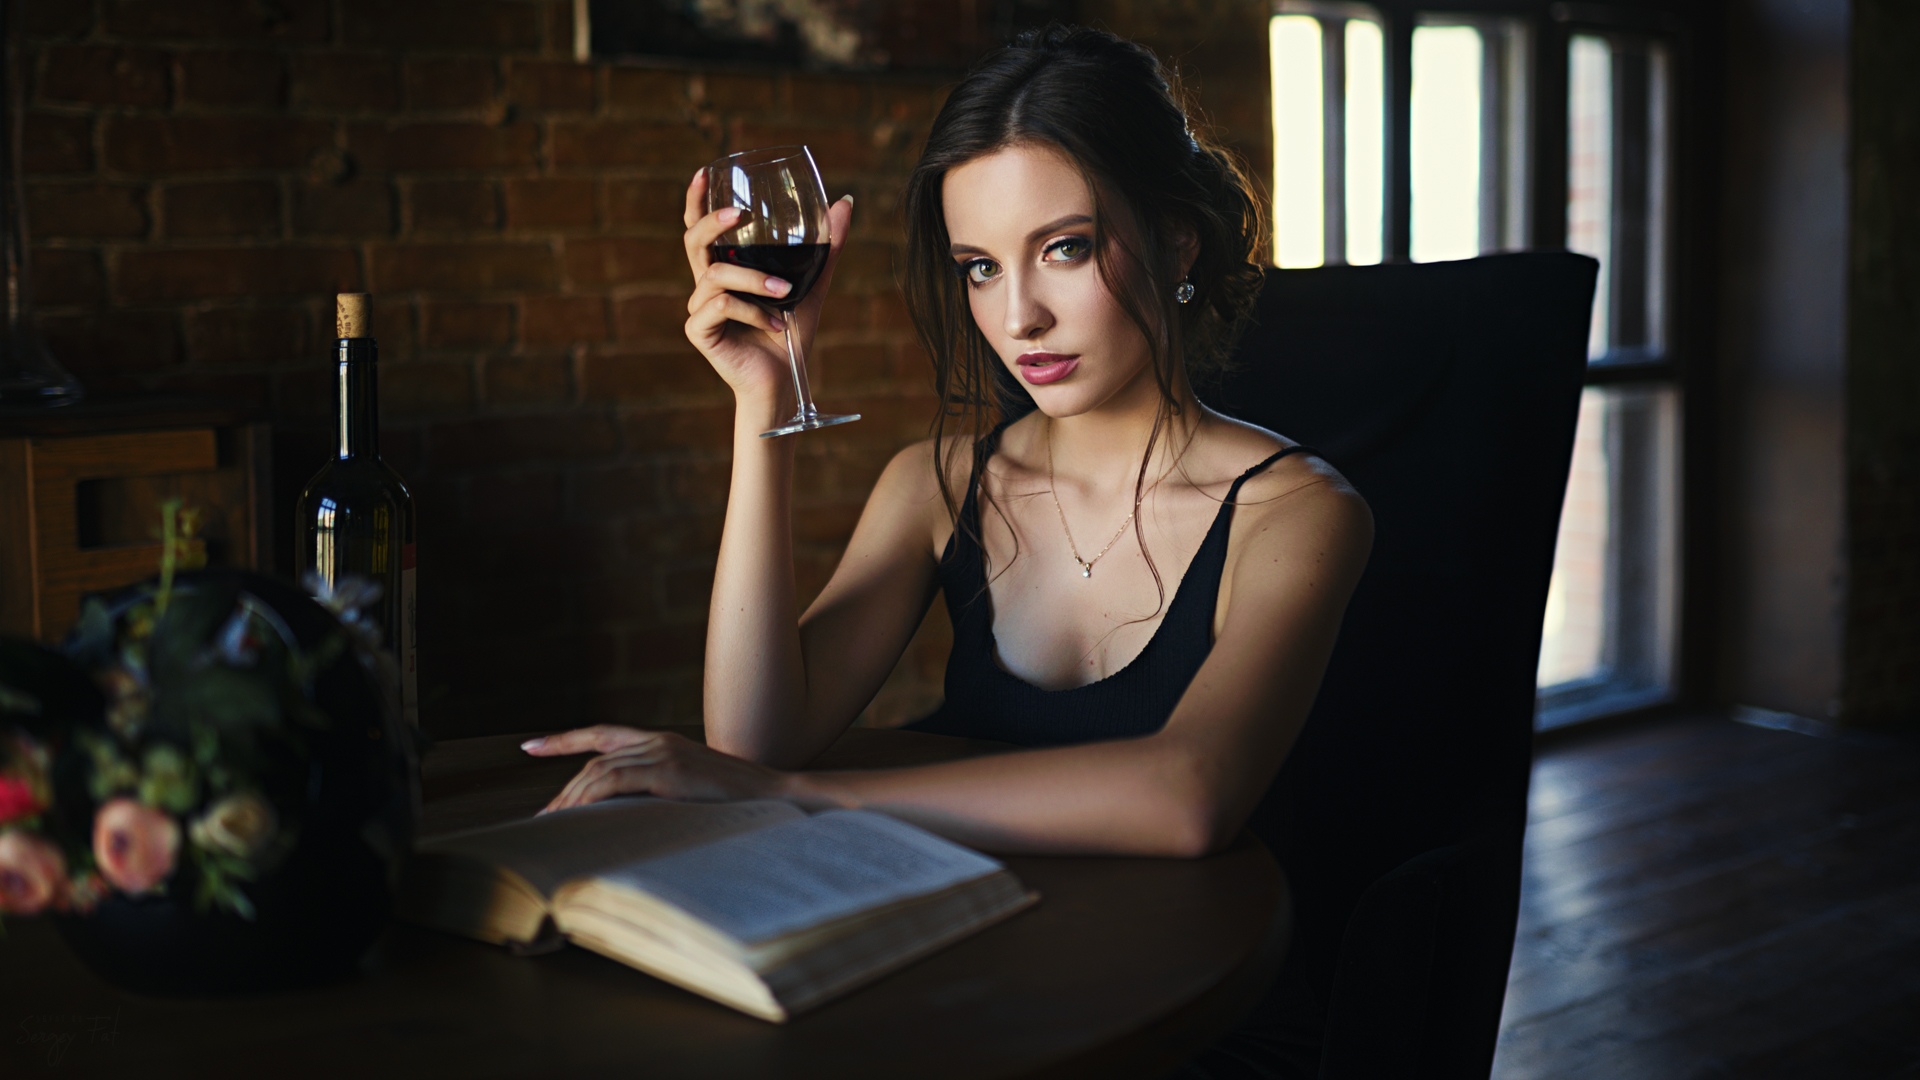 People 1920x1080 Sergey Zhirnov women model portrait looking at viewer tank top necklace wine books sitting women indoors brunette drinking glass depth of field Zlata Avdeeva table sitting on chair classy glamour girls glamour